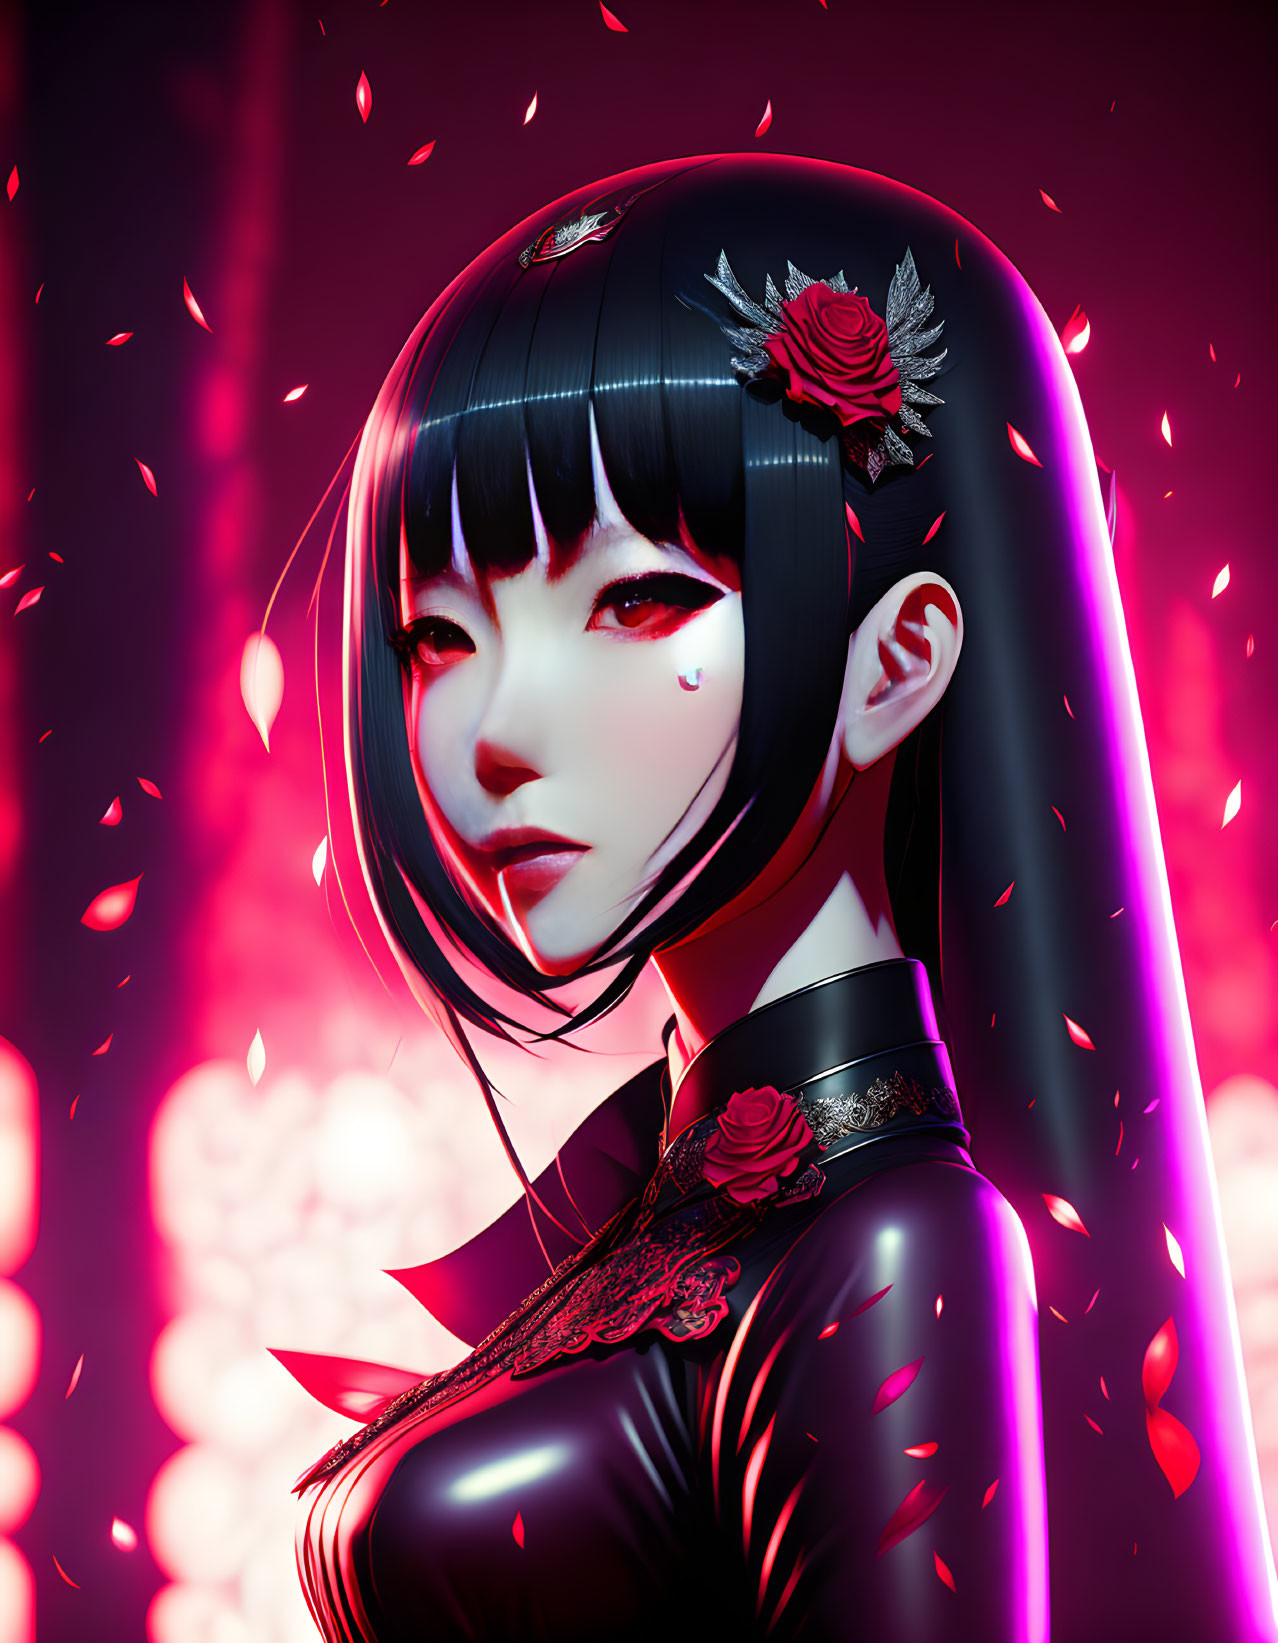 3D Illustration: Woman with Black Hair, Red Highlights, Rose, Tears on Pink Neon Background